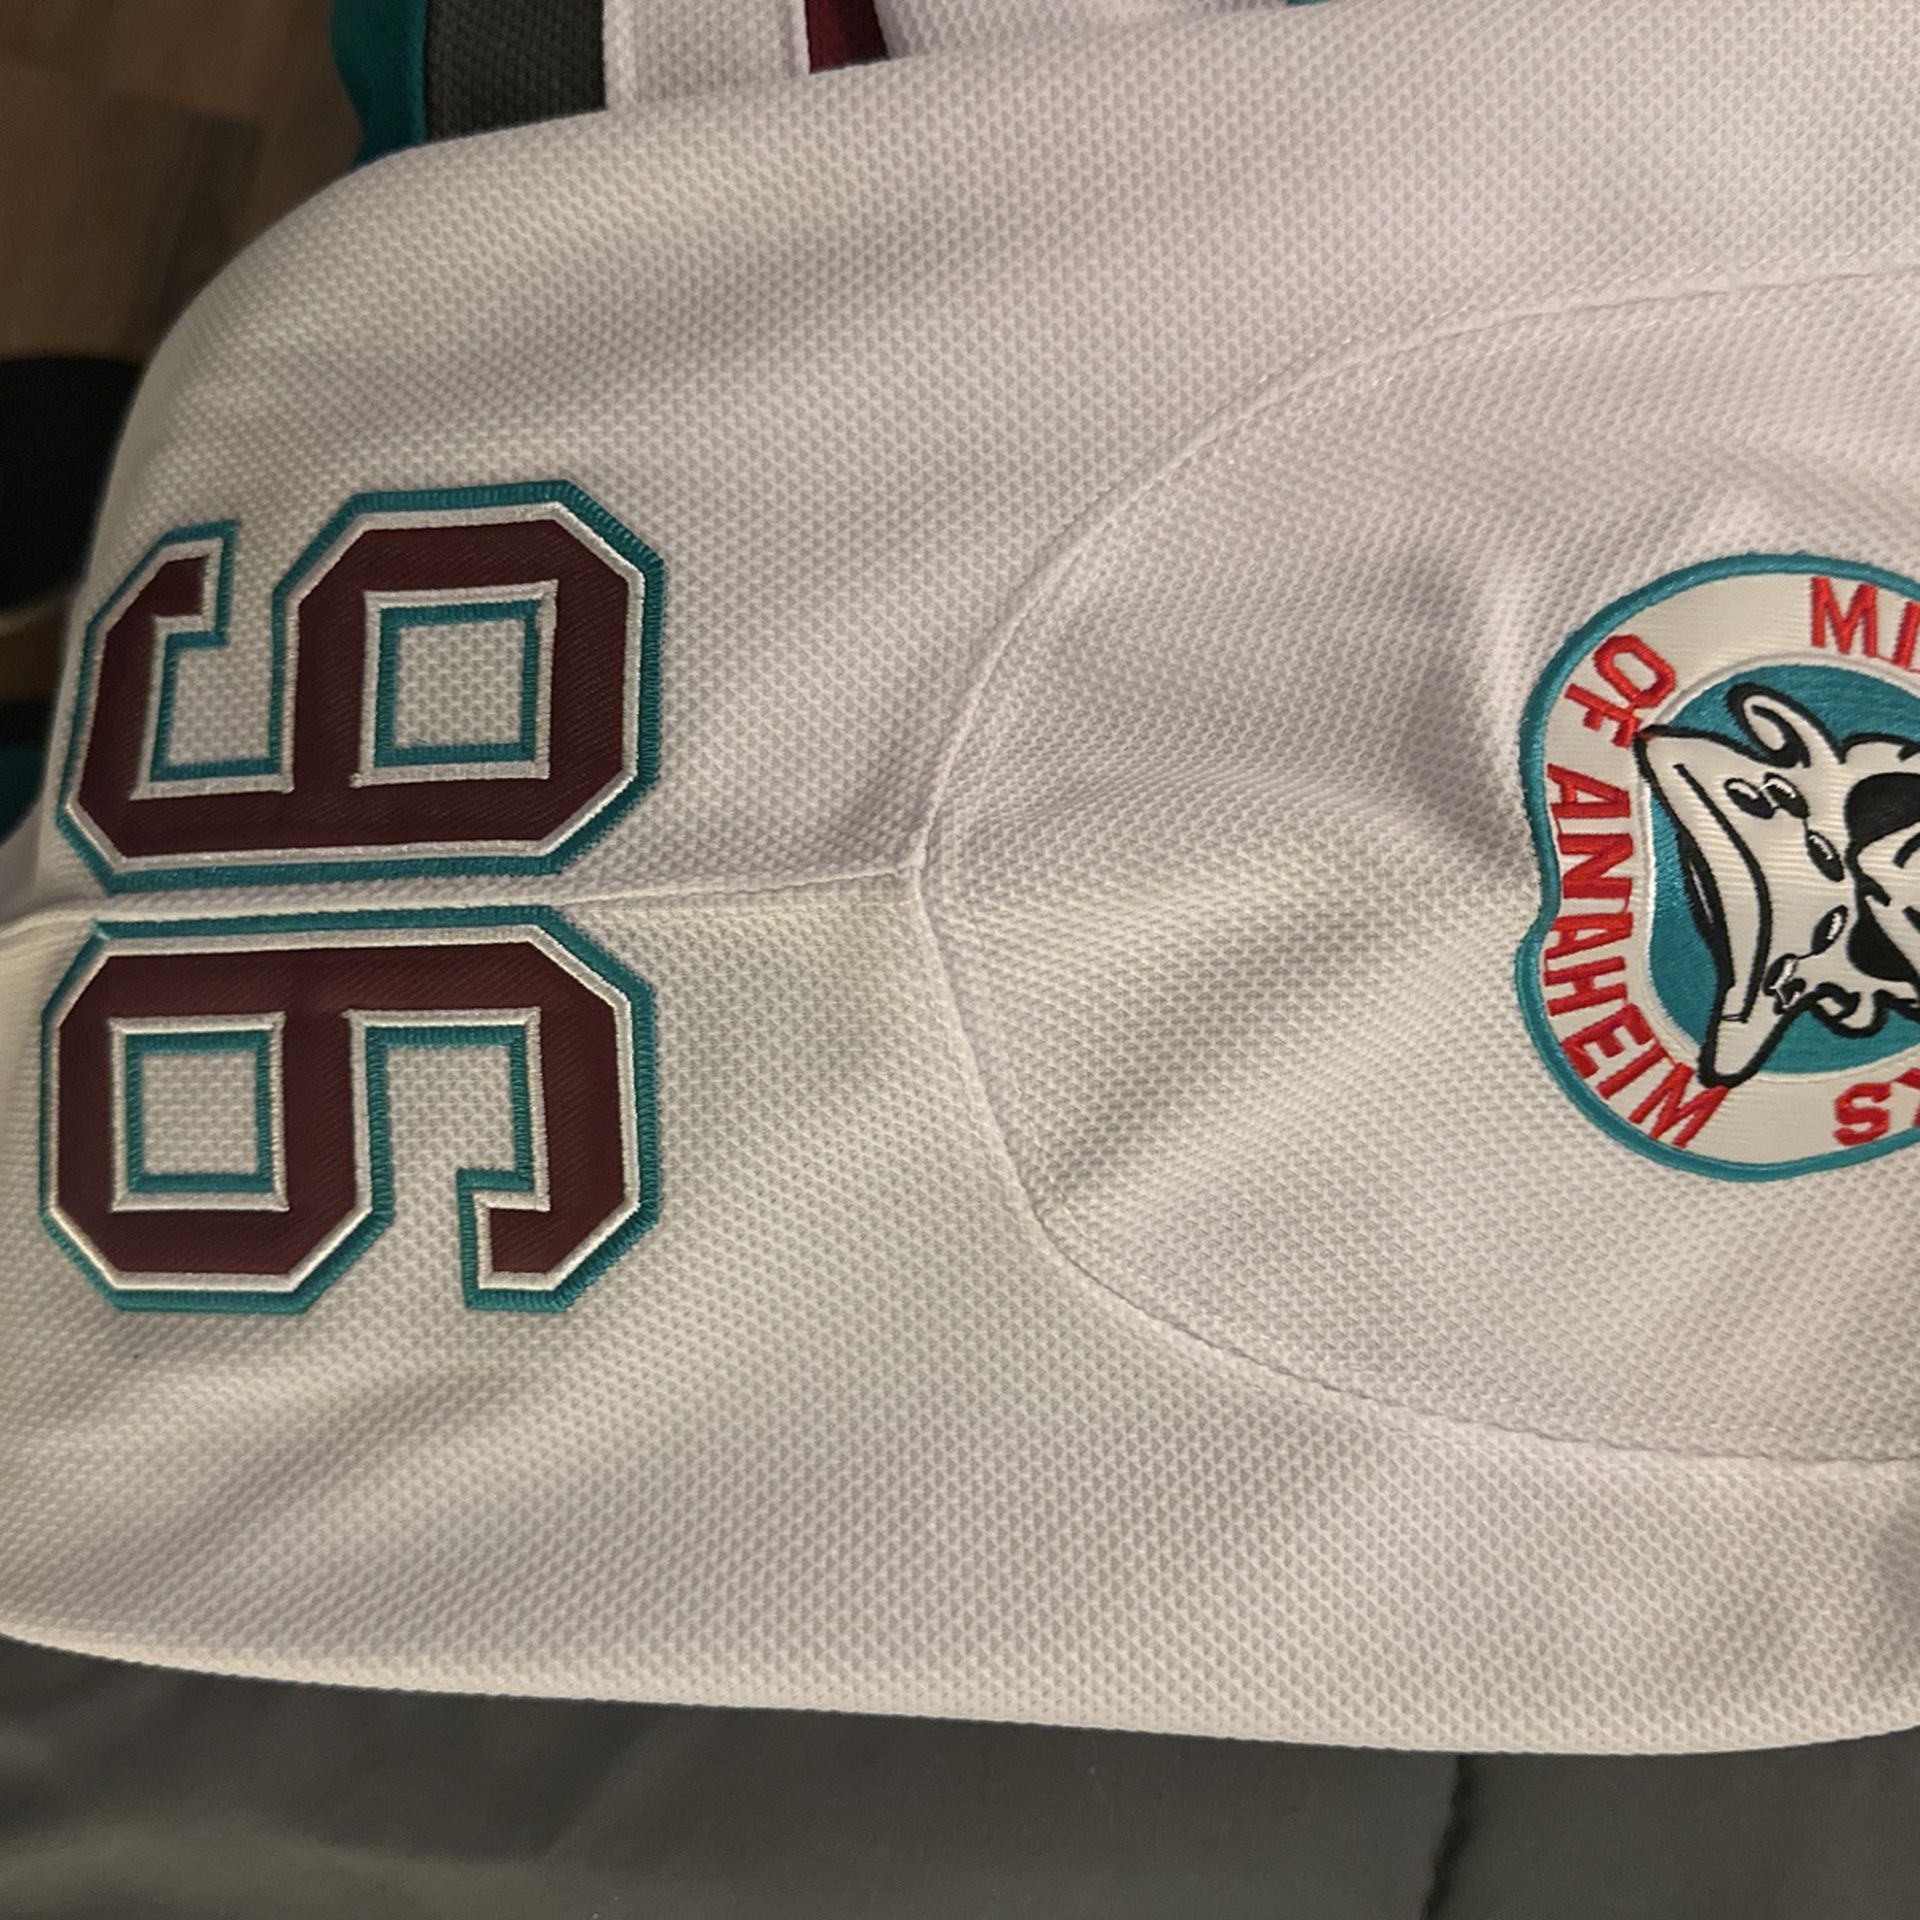 Adidas x Disney Mighty Ducks Conway Authentic Jersey Sz 50 Mens New for  Sale in Chino Hills, CA - OfferUp